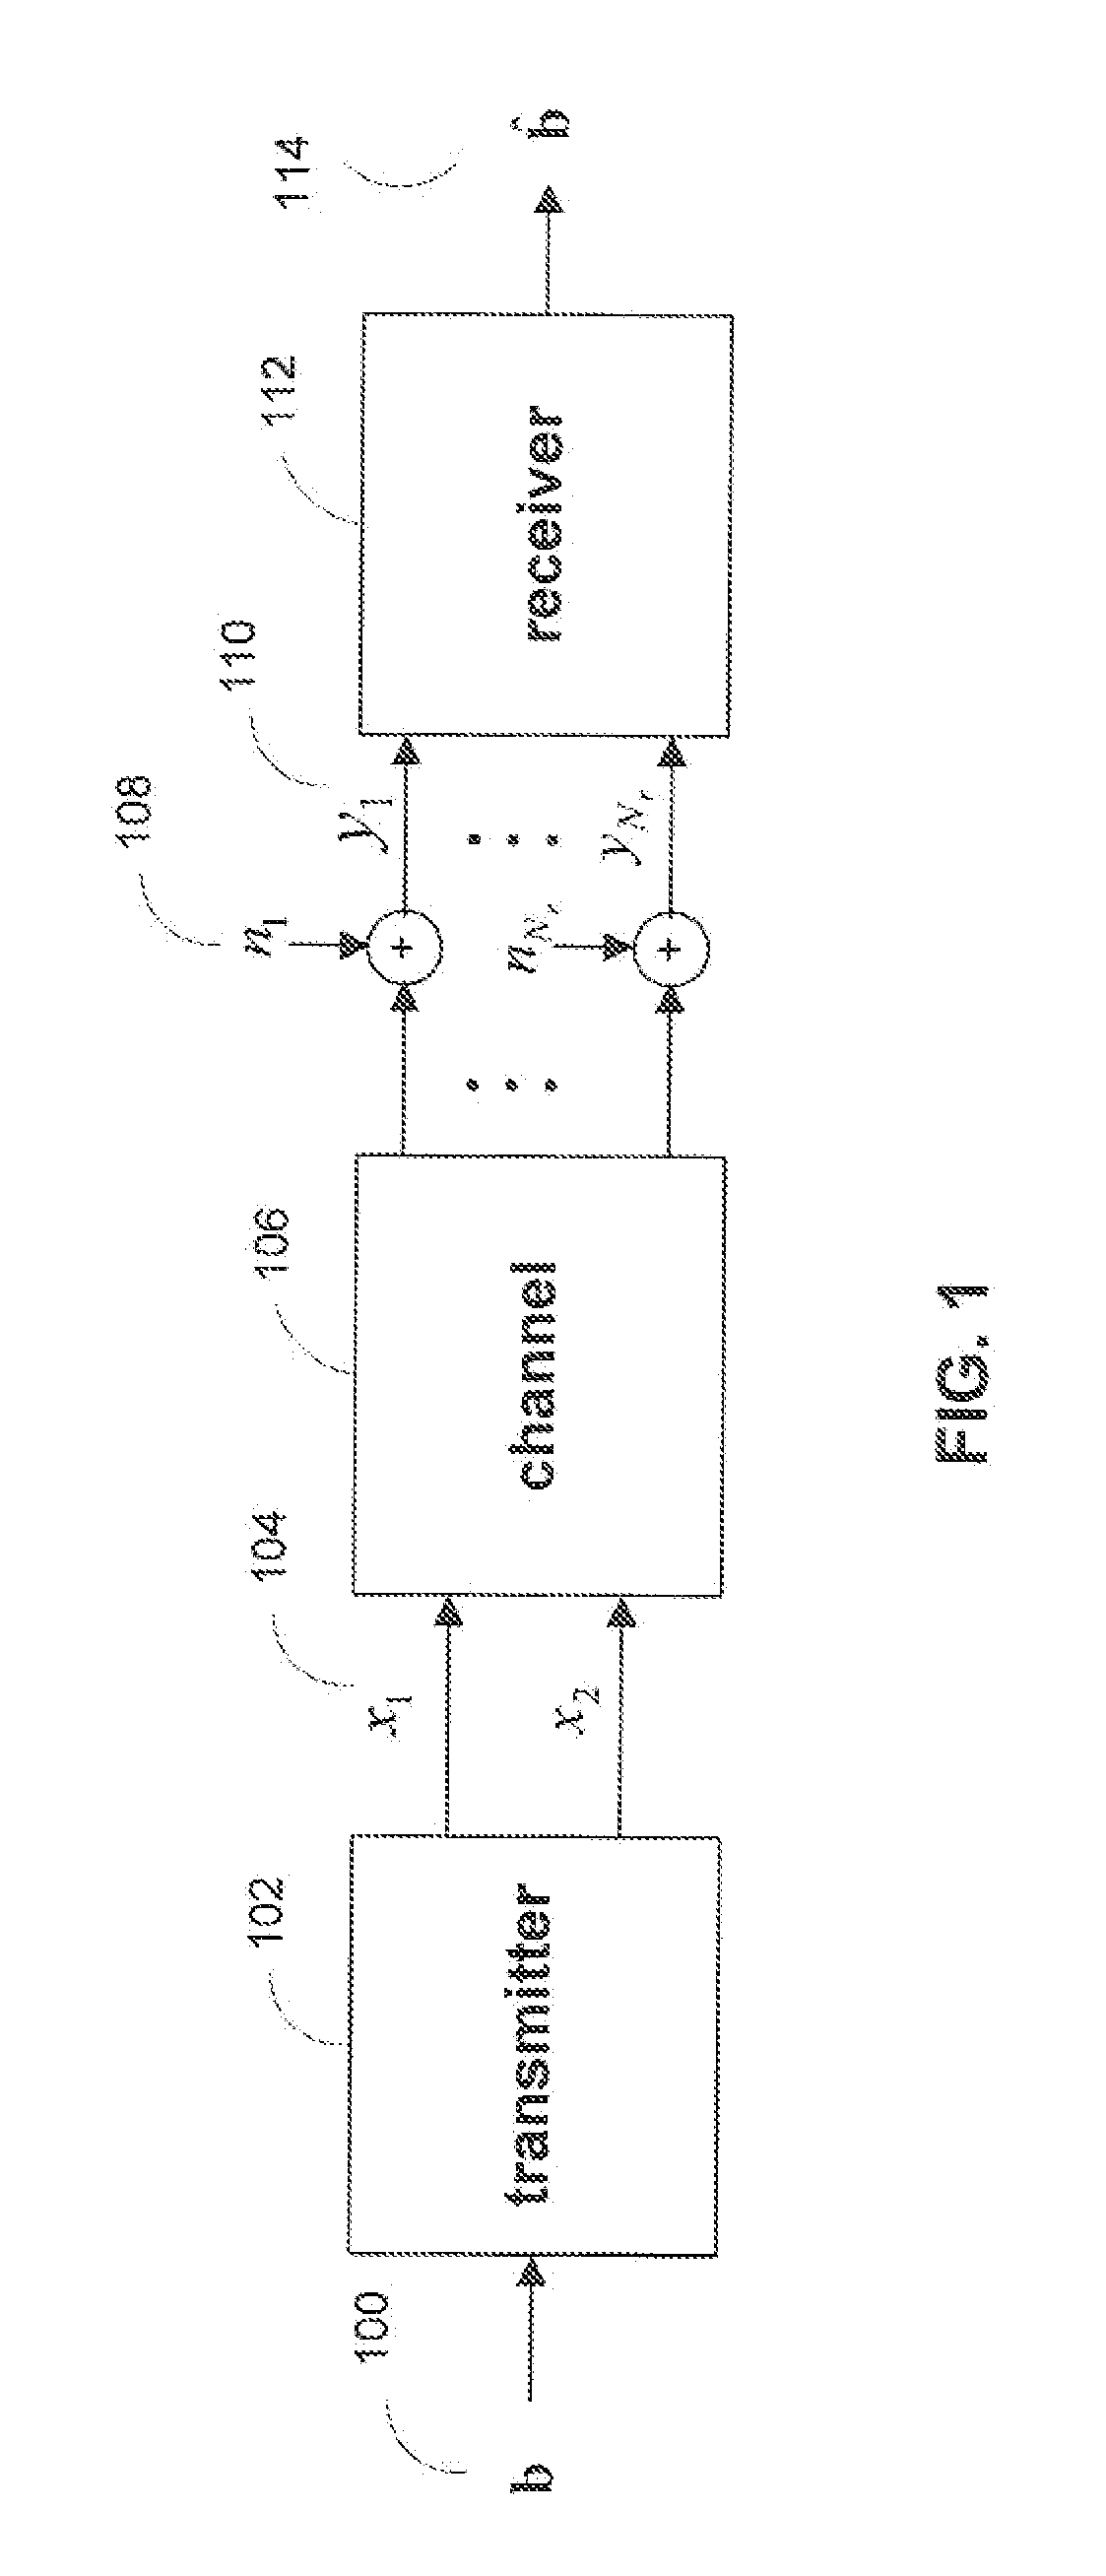 Decoding method for alamouti scheme with HARQ and/or repetition coding